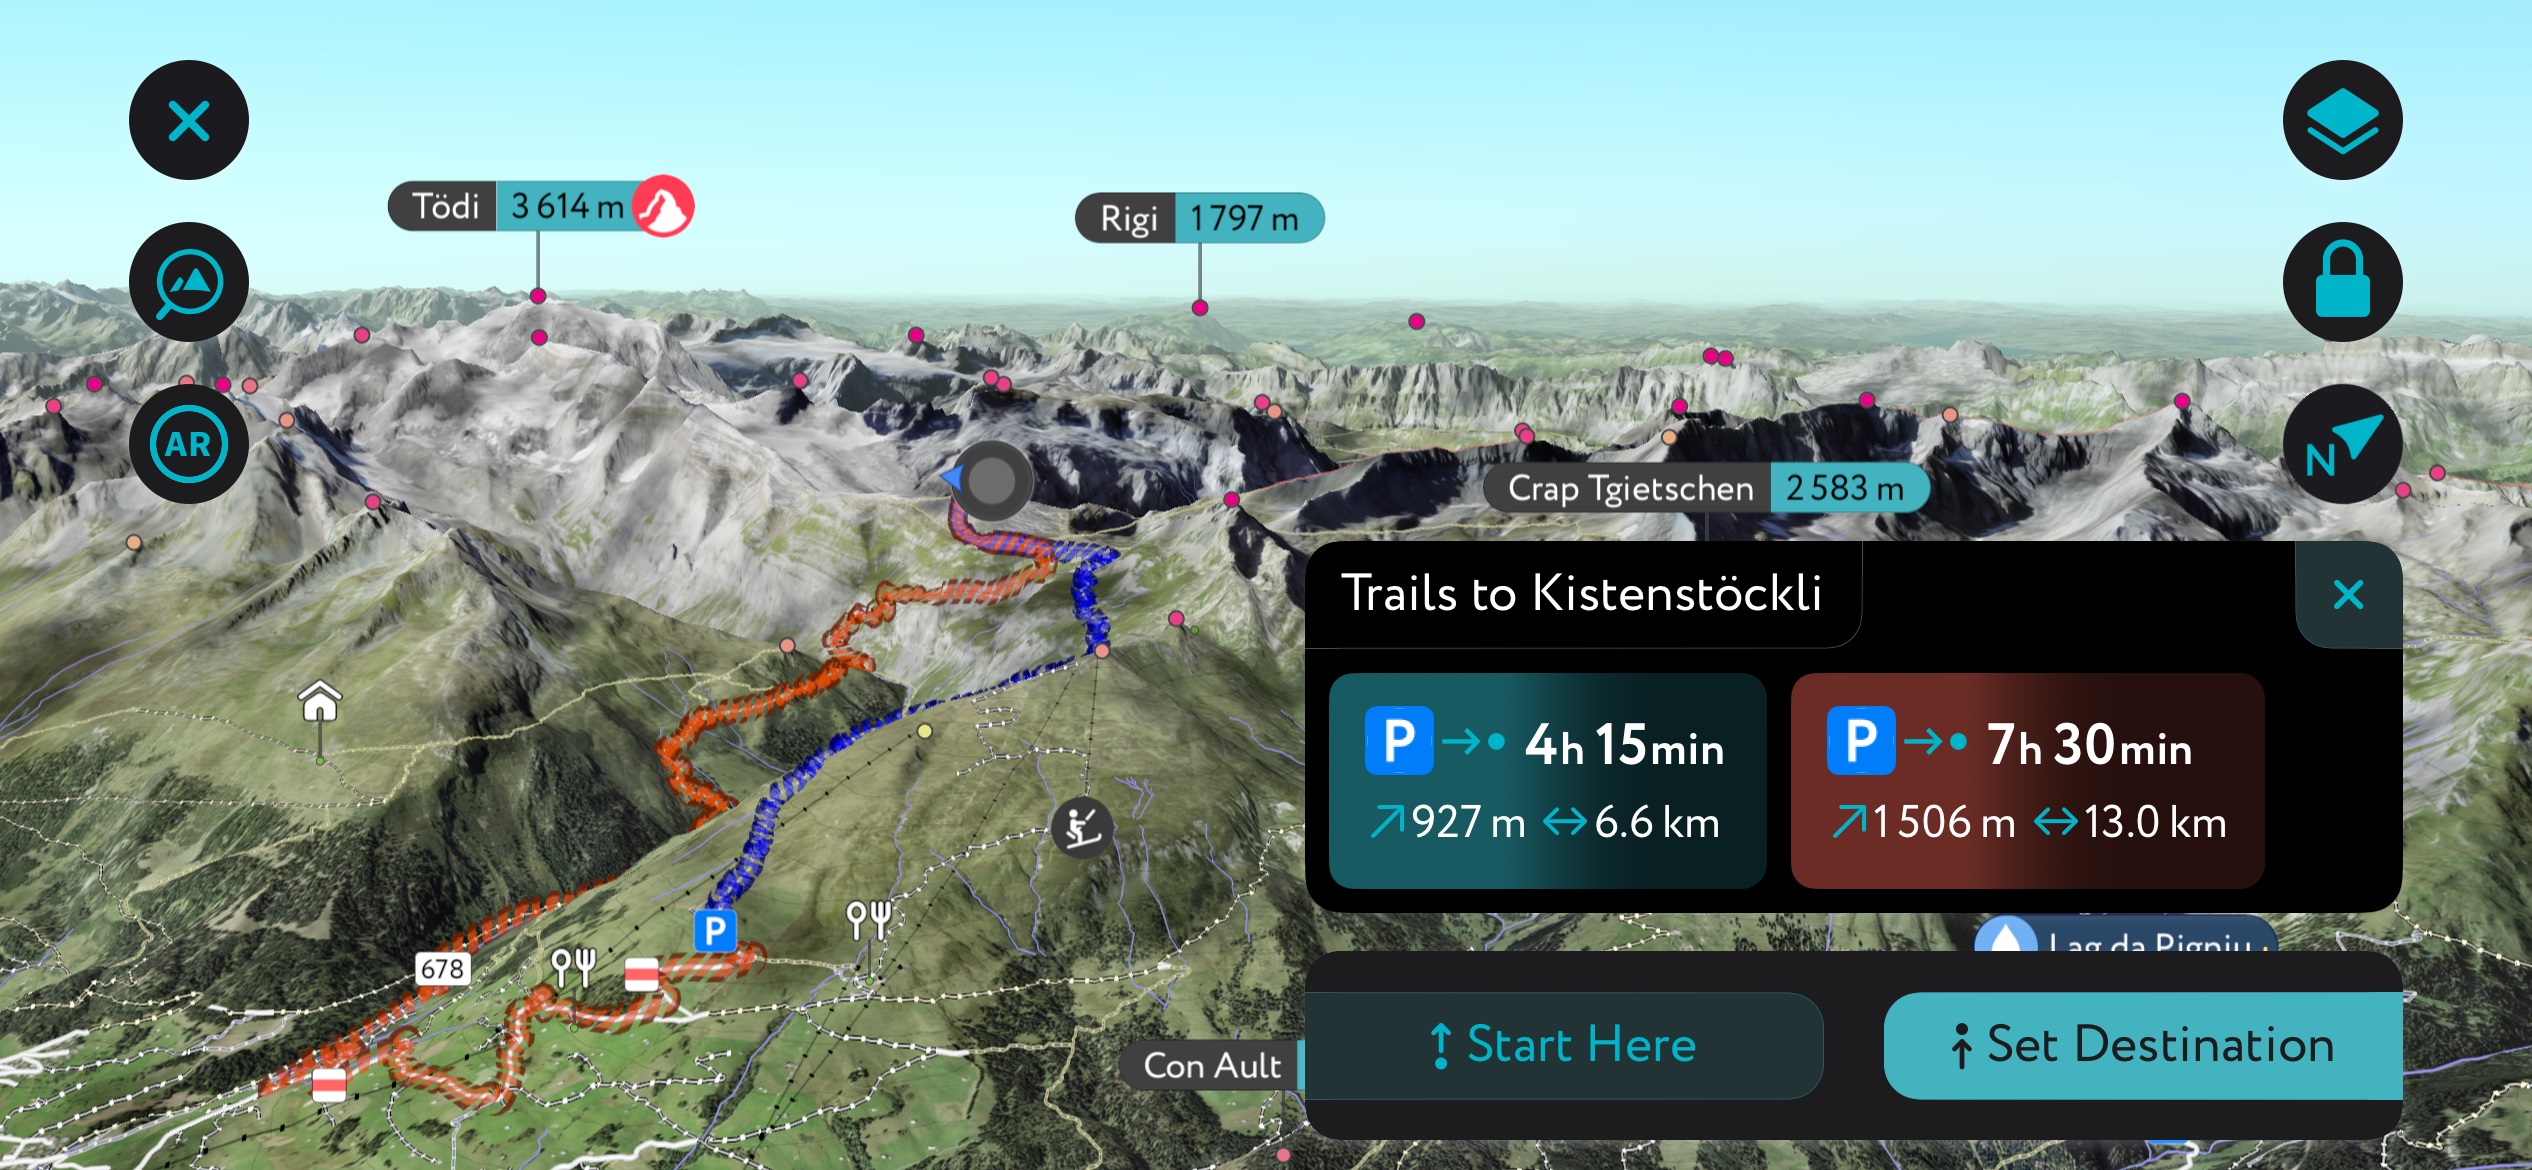 Just choose a destination, and the PeakVisor App will generate route options for your trip. Here are the possibilities for Kistenstöckli.. Surselva